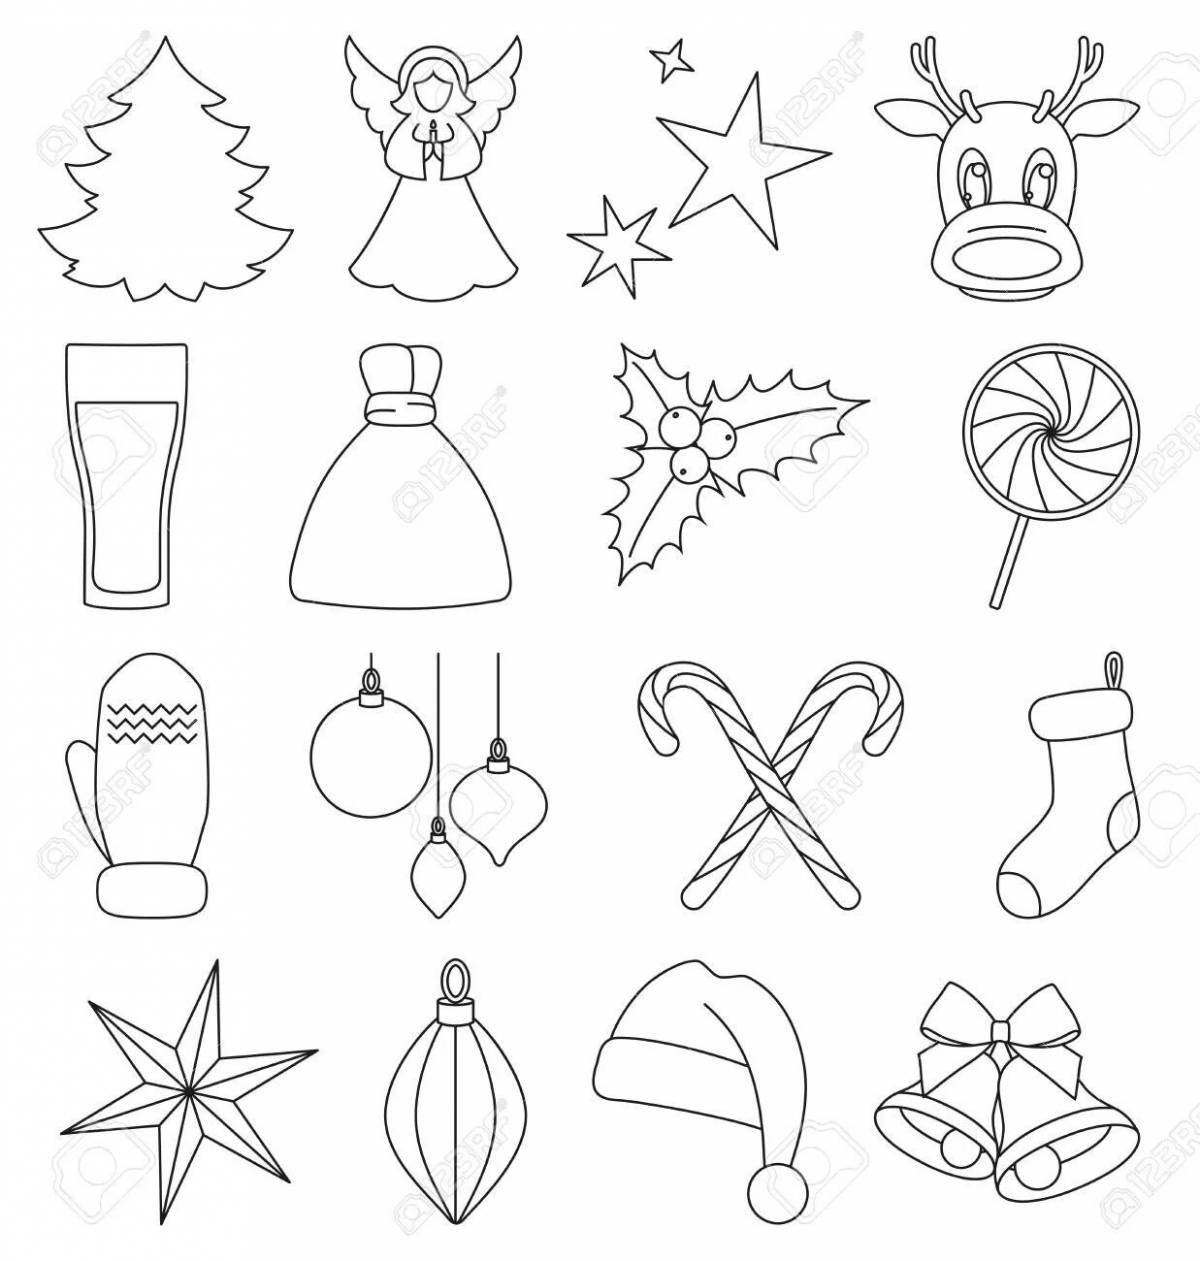 Exquisite Christmas coloring stickers